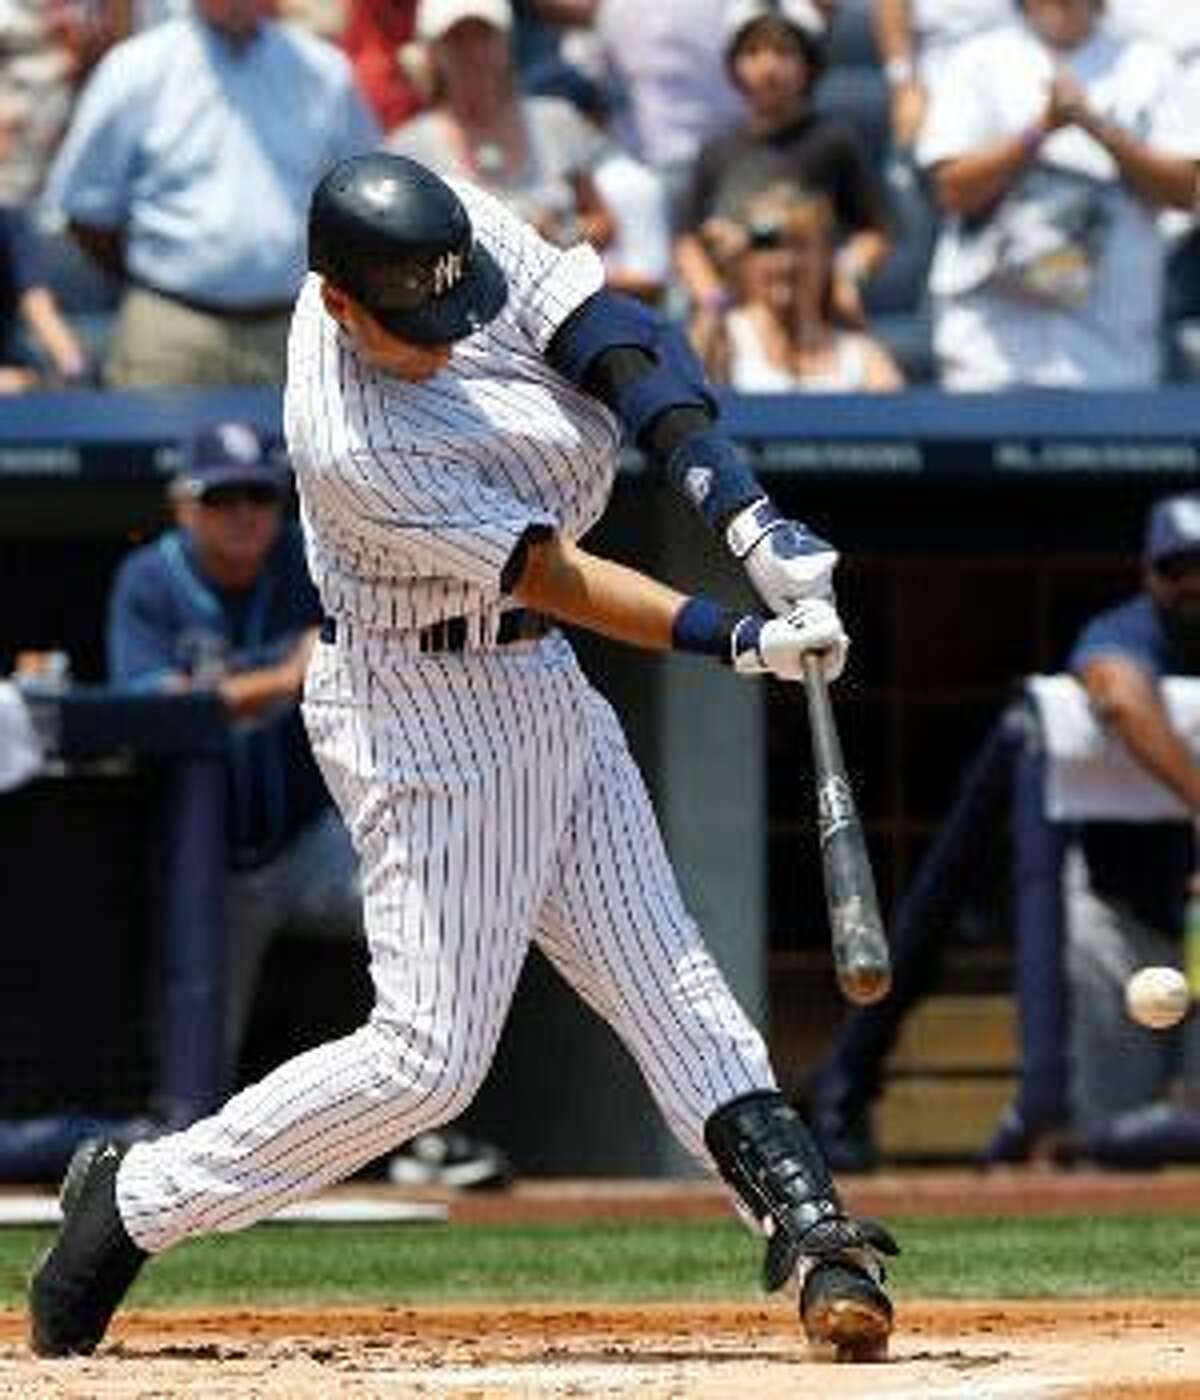 Derek Jeter gets 3,000th hit on a solo home run, goes 5-for-5 in